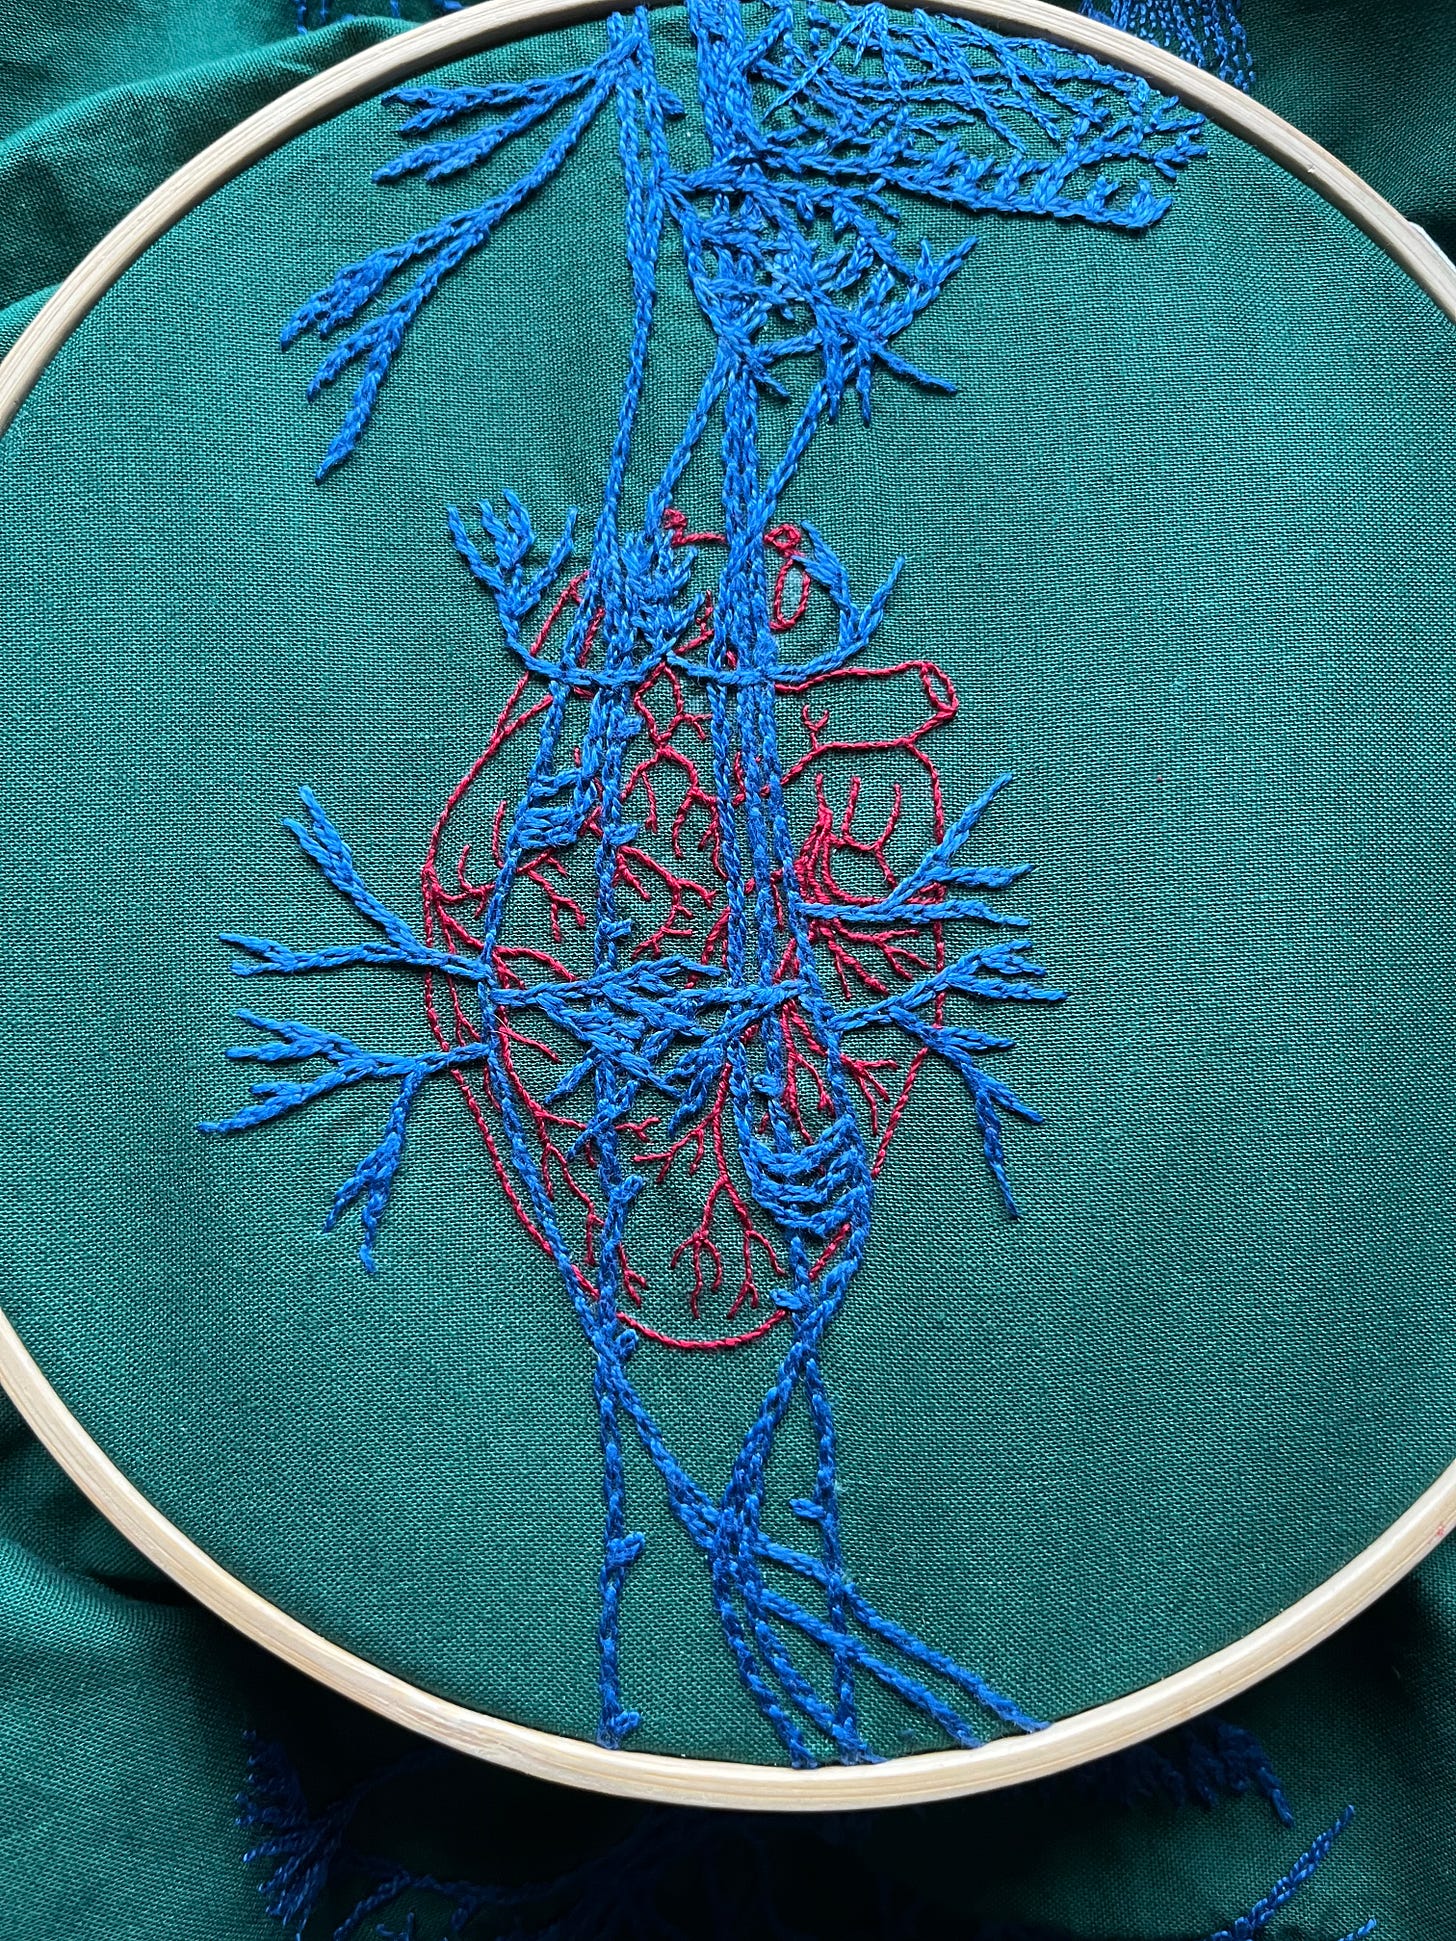 The upper chest area of a vagus nerve stitched in blue chain stitch on green cotton is in an embroidery hoop. An anatomical heart is stitched in two and one strand red whipped back stitch.